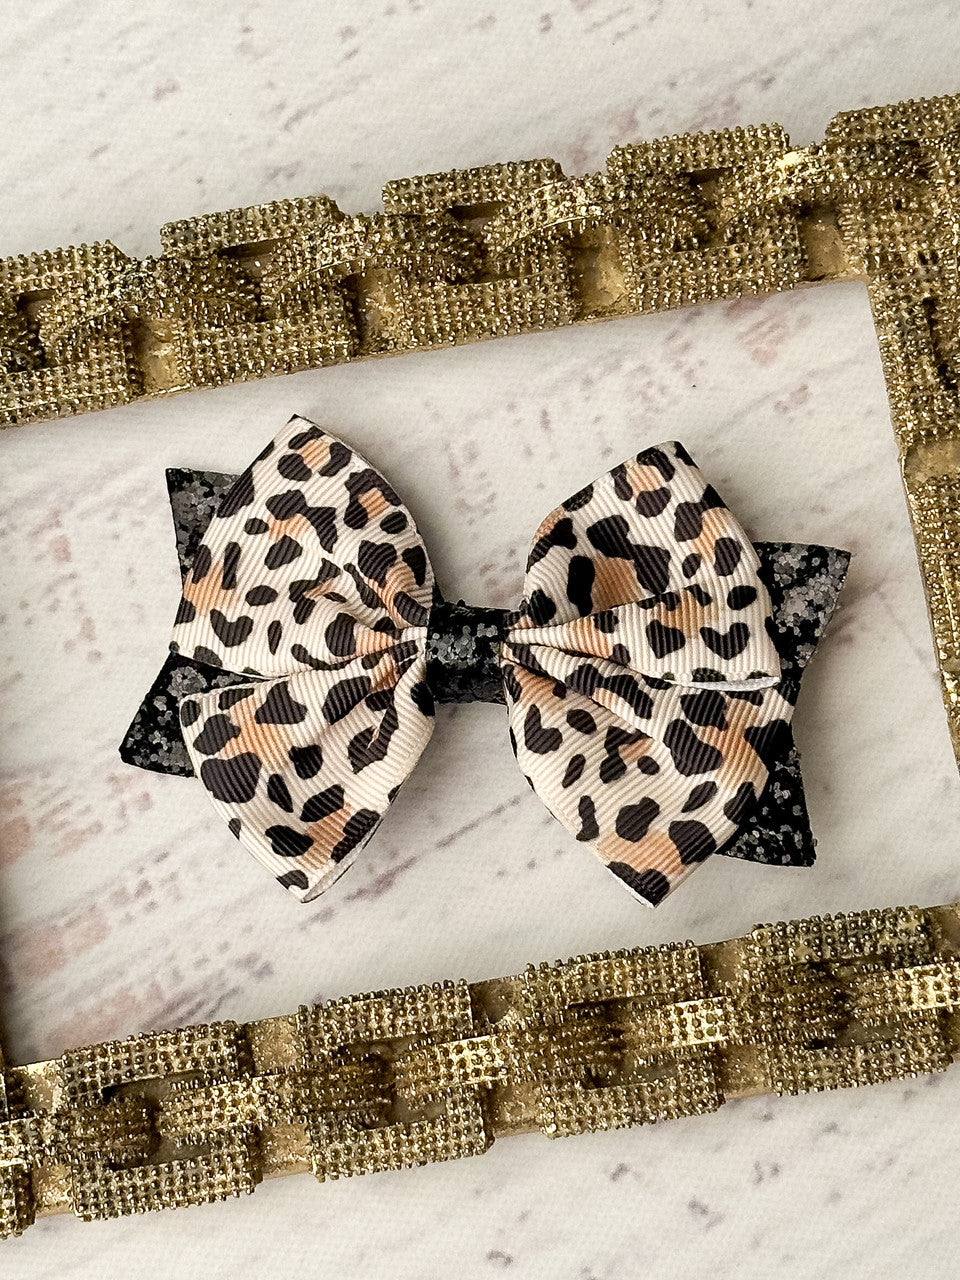 Animal print and black glitter bow on a single alligator clip- approximately 4 inches across.